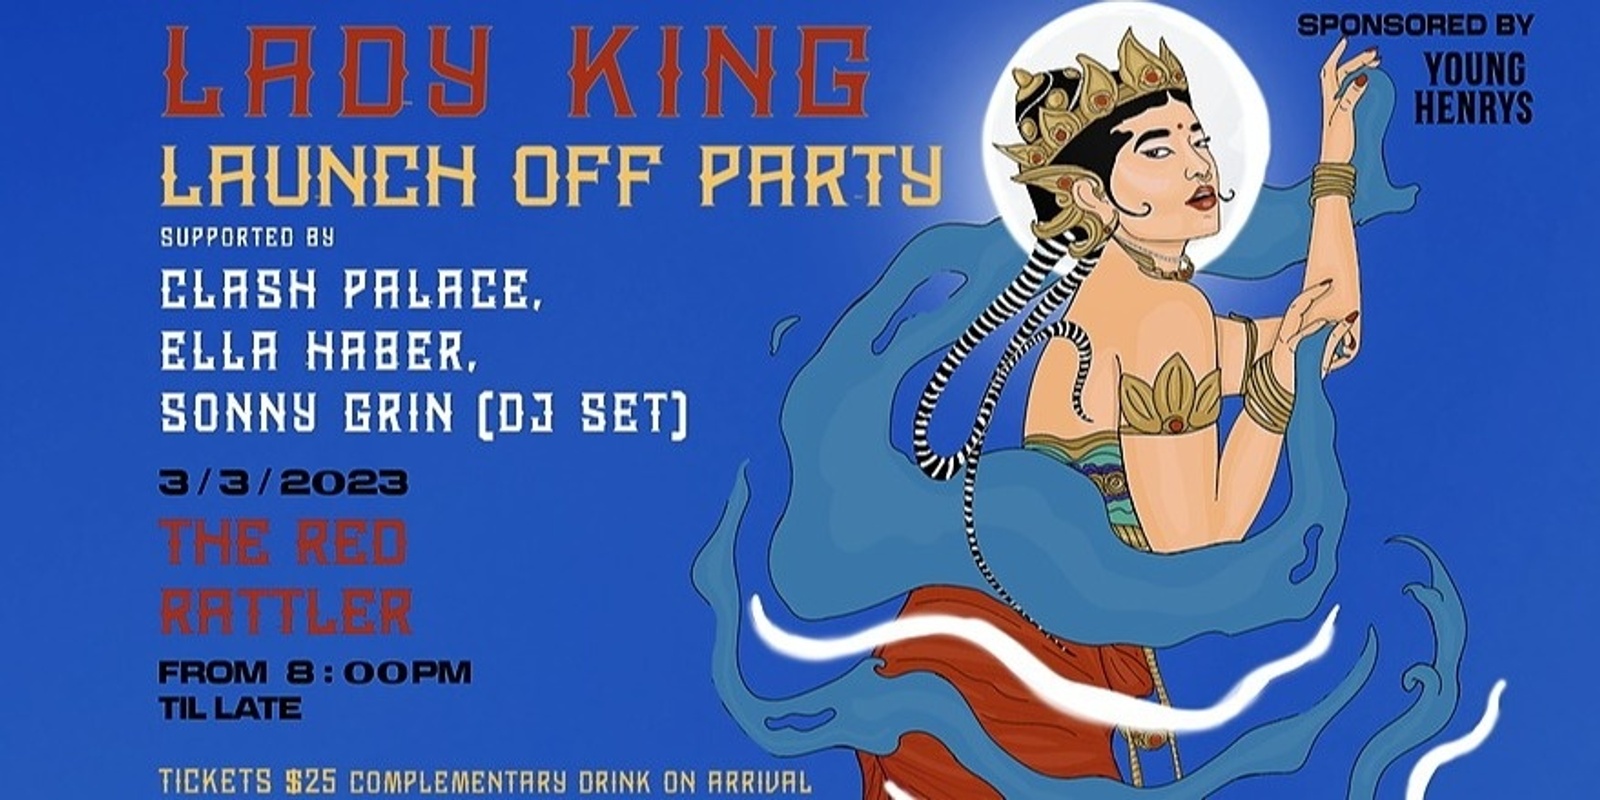 Banner image for LADY KING Launch Off Party